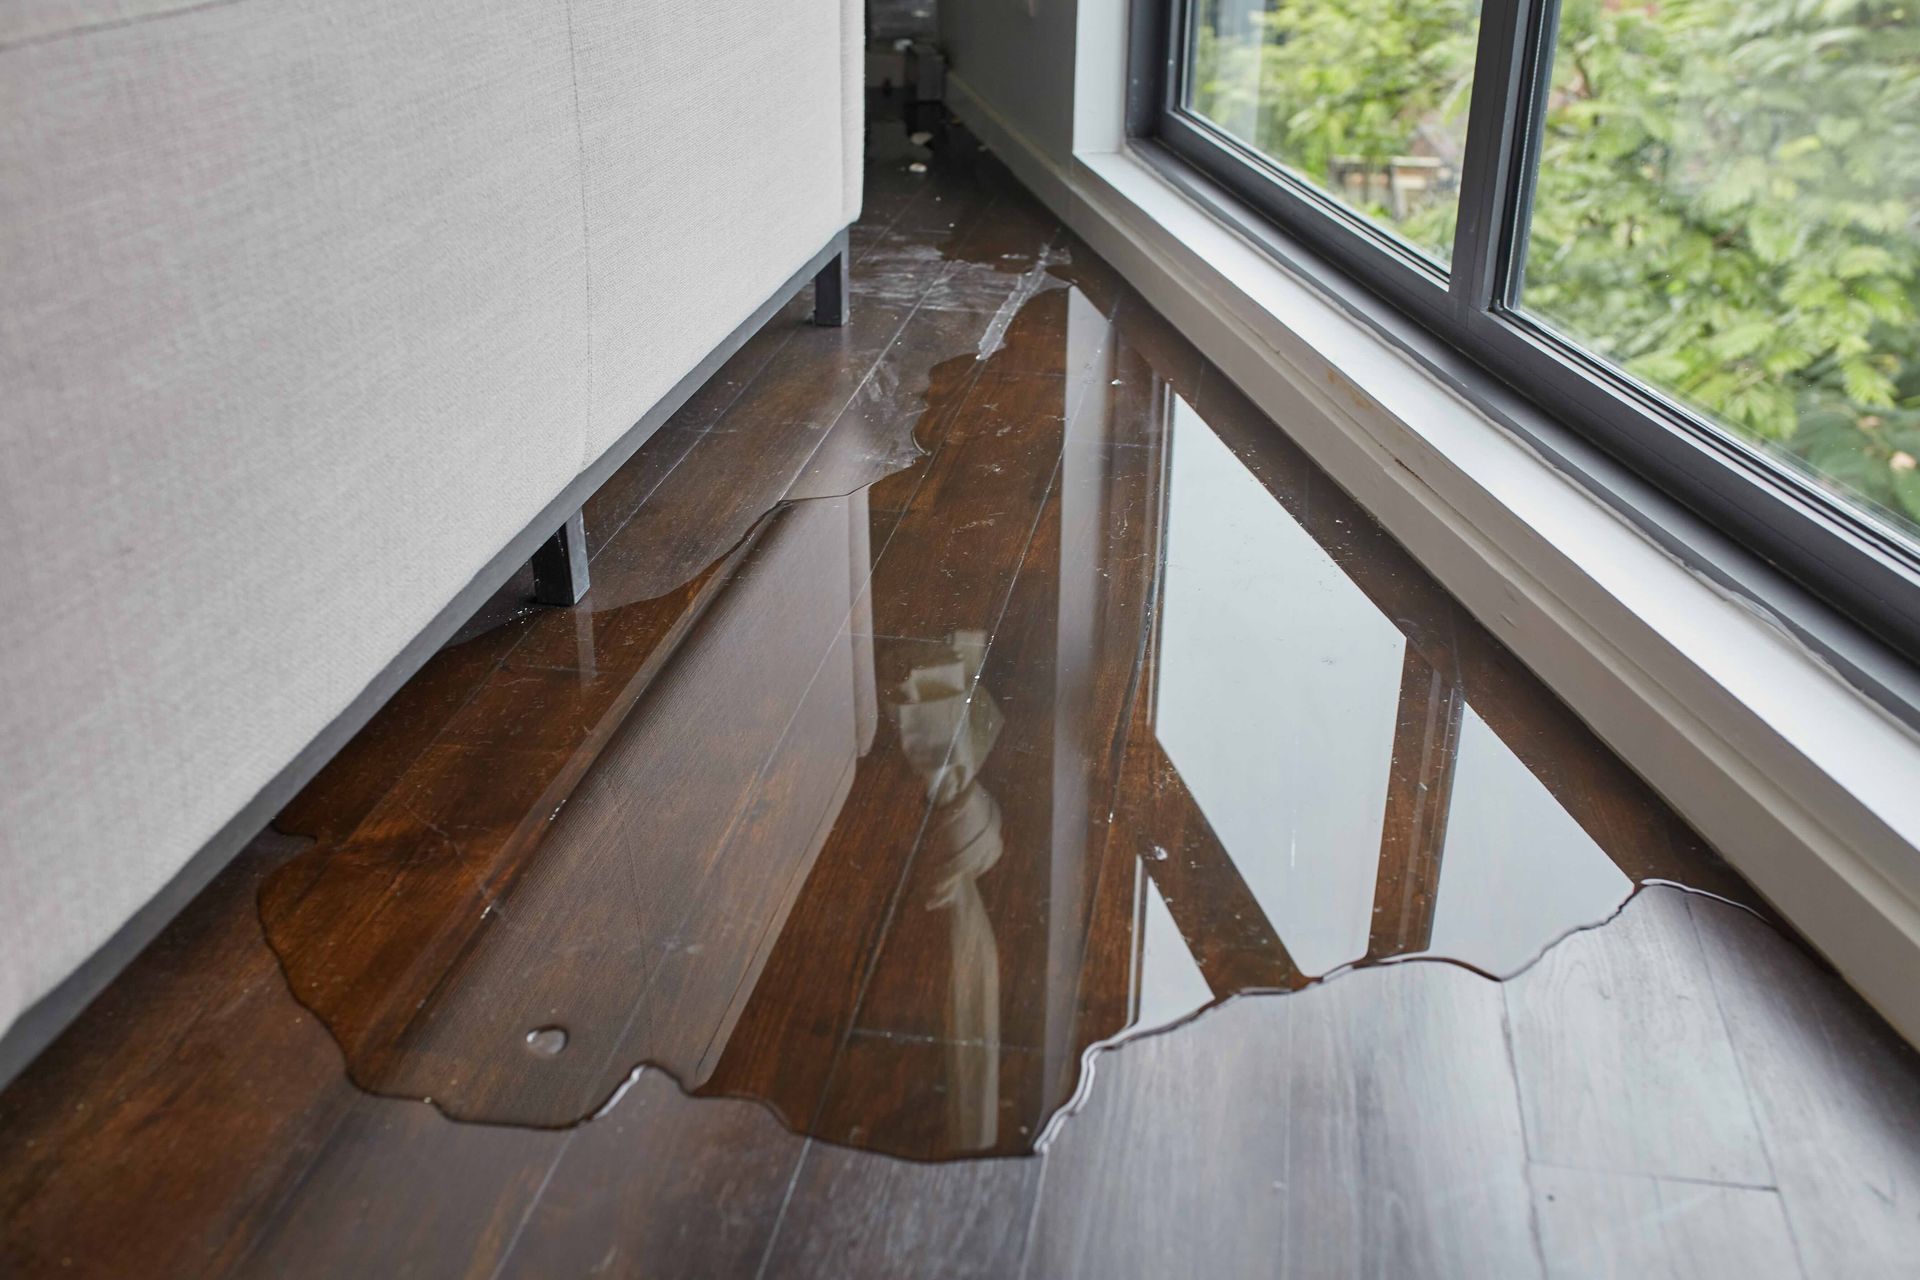 a puddle of water on a wooden floor next to a window .